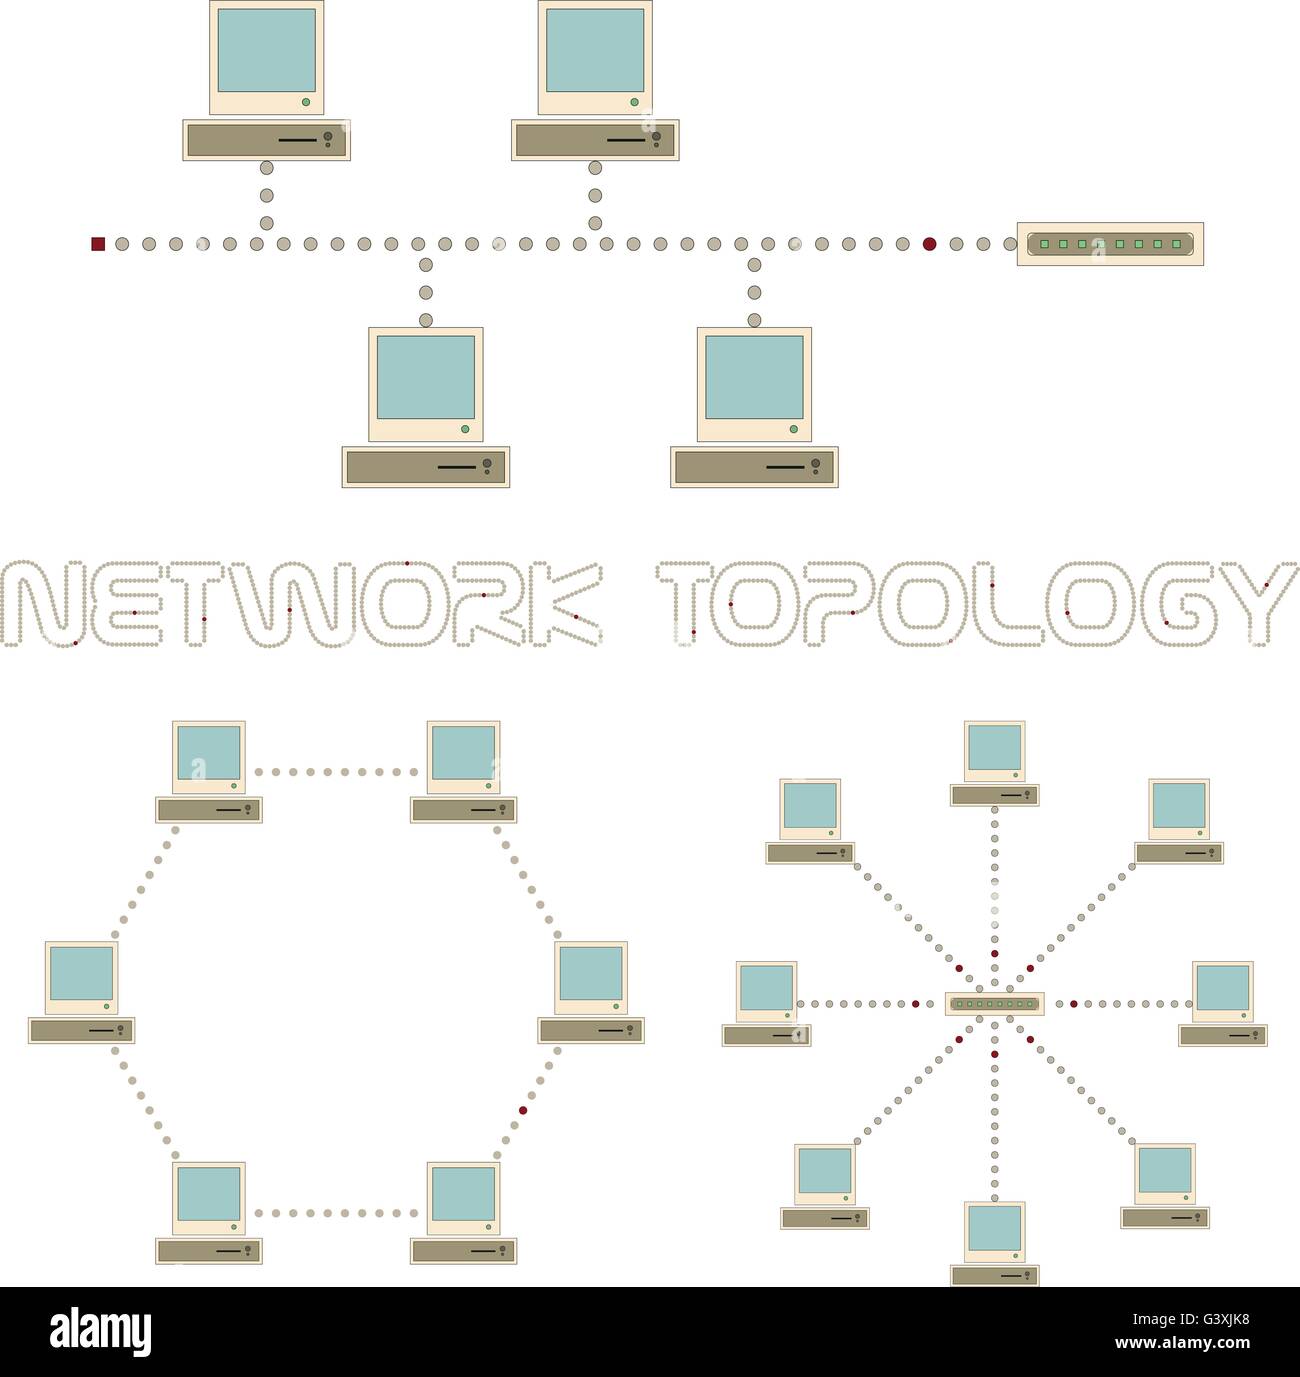 File:Ring Topology.gif - Wikimedia Commons